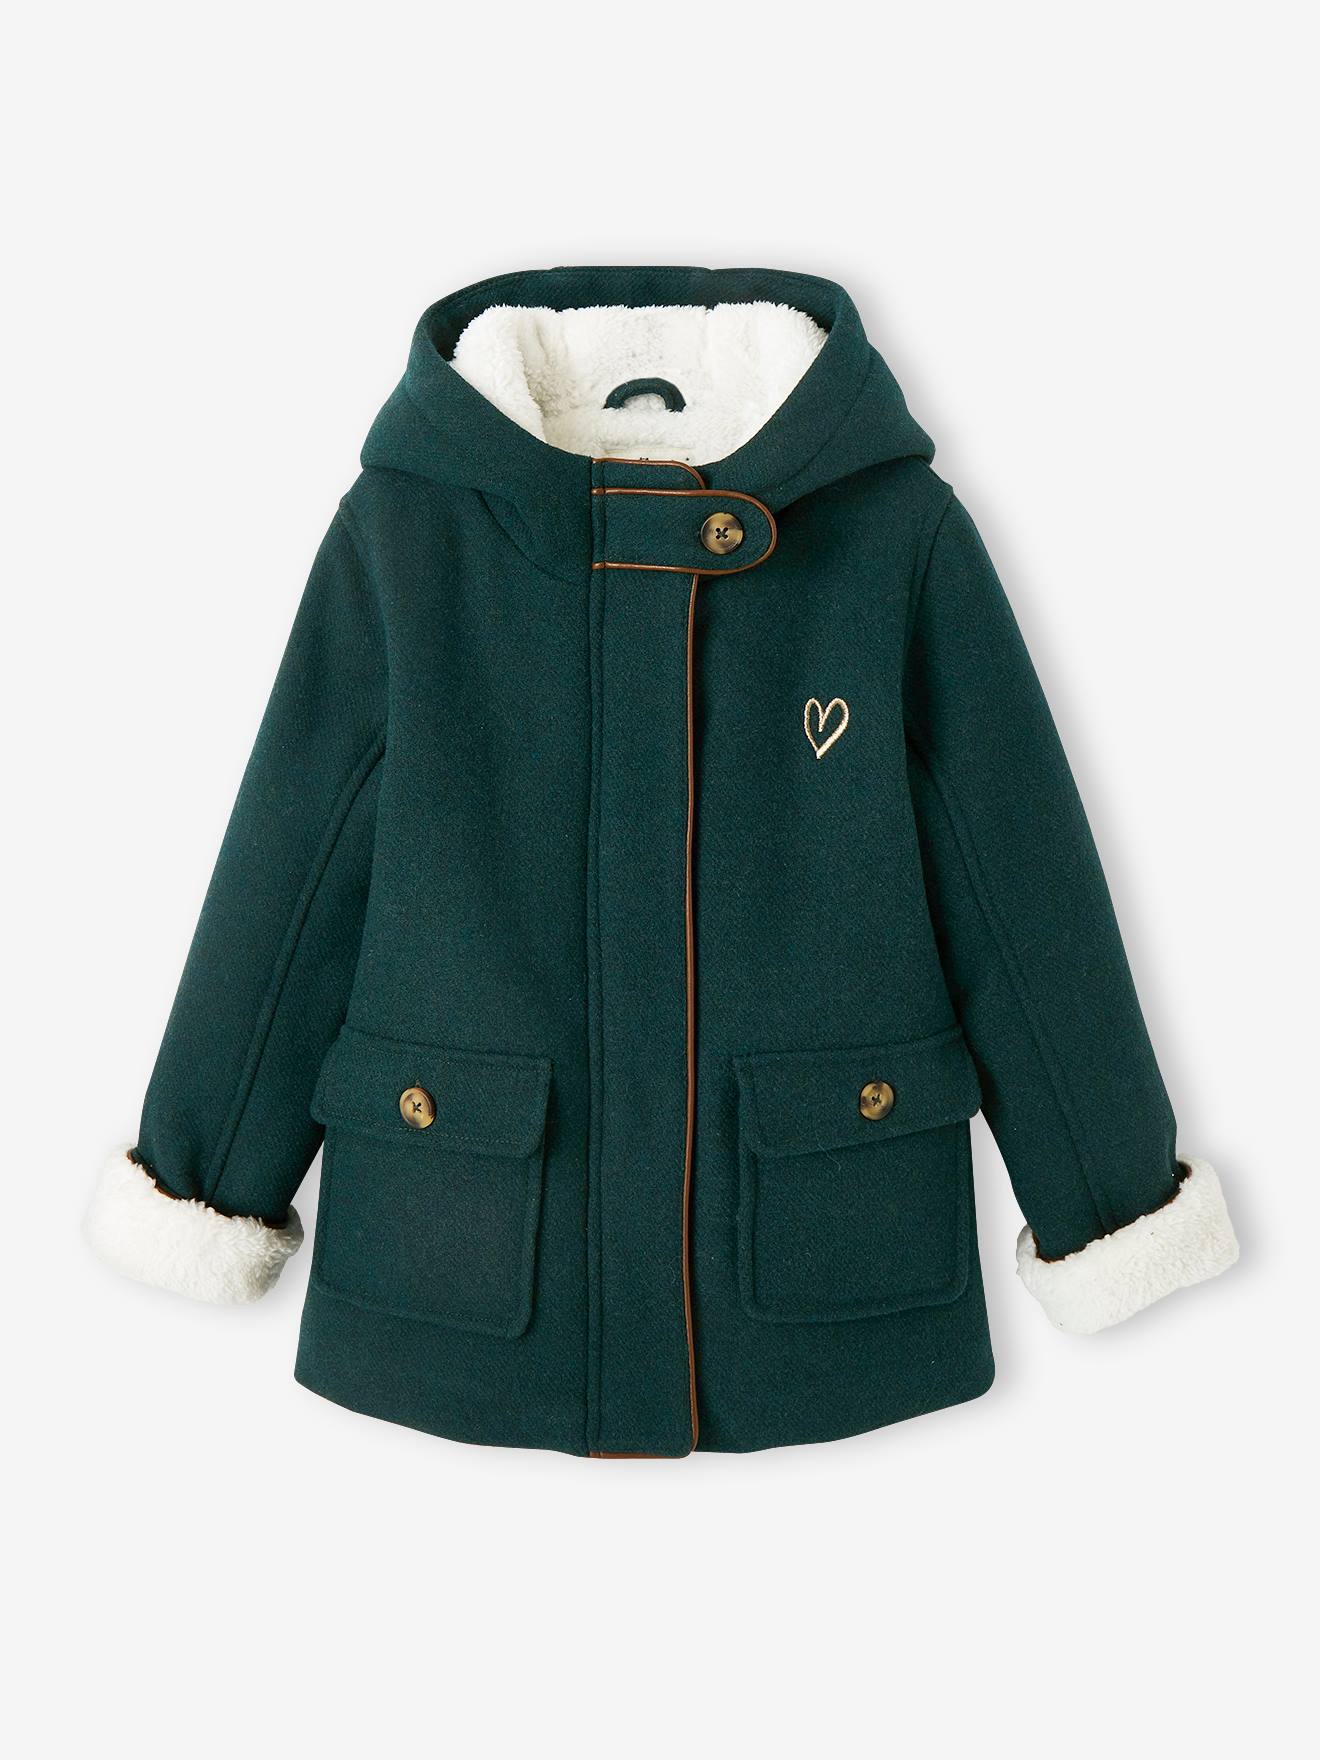 Woollen Coat with Hood & Sherpa Lining for Girls green dark solid with design